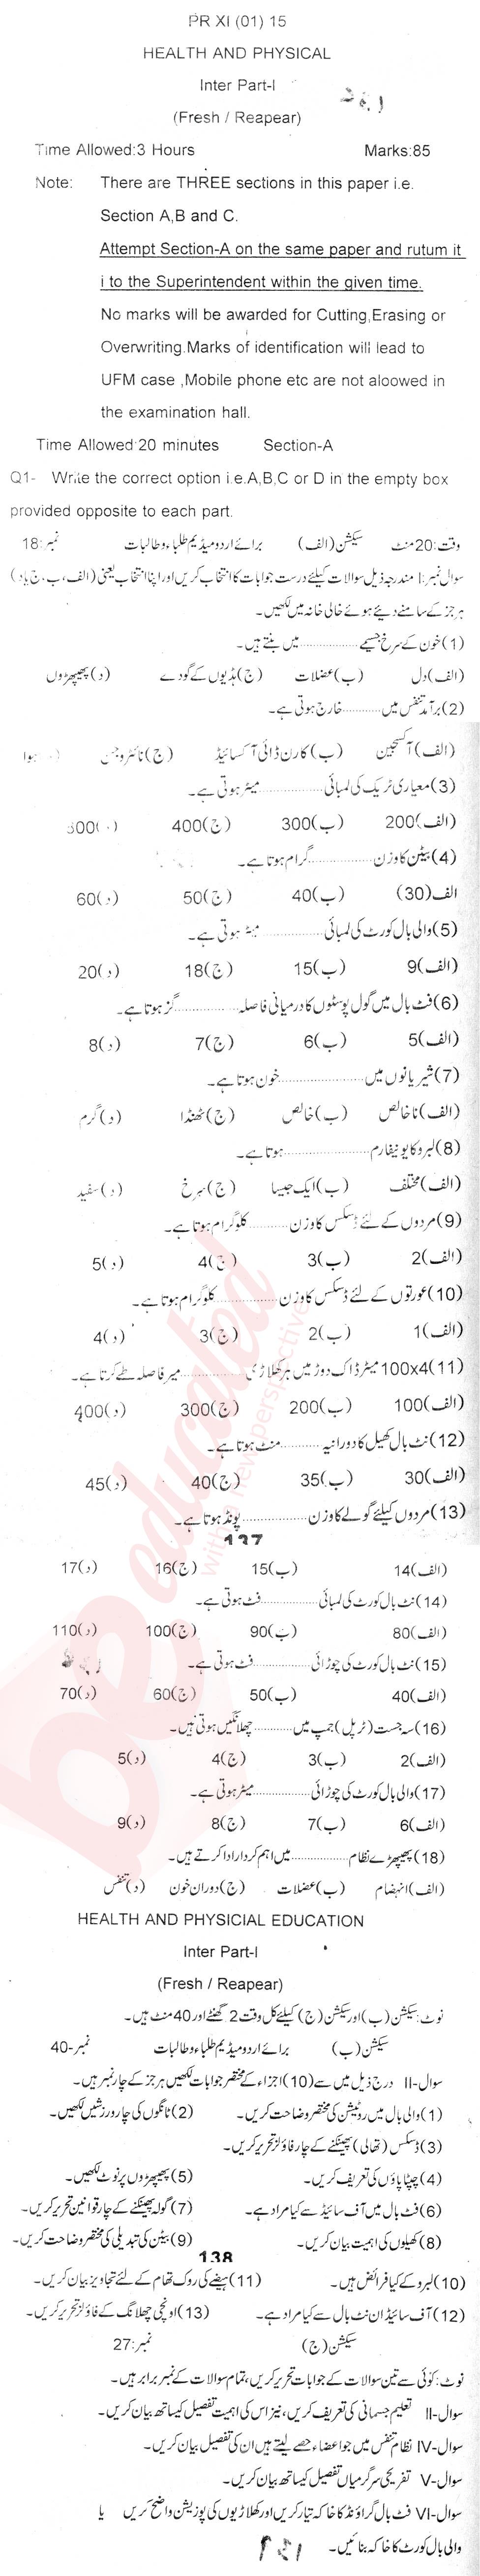 Health and Physical Education FA Part 1 Past Paper Group 1 BISE Peshawar 2015